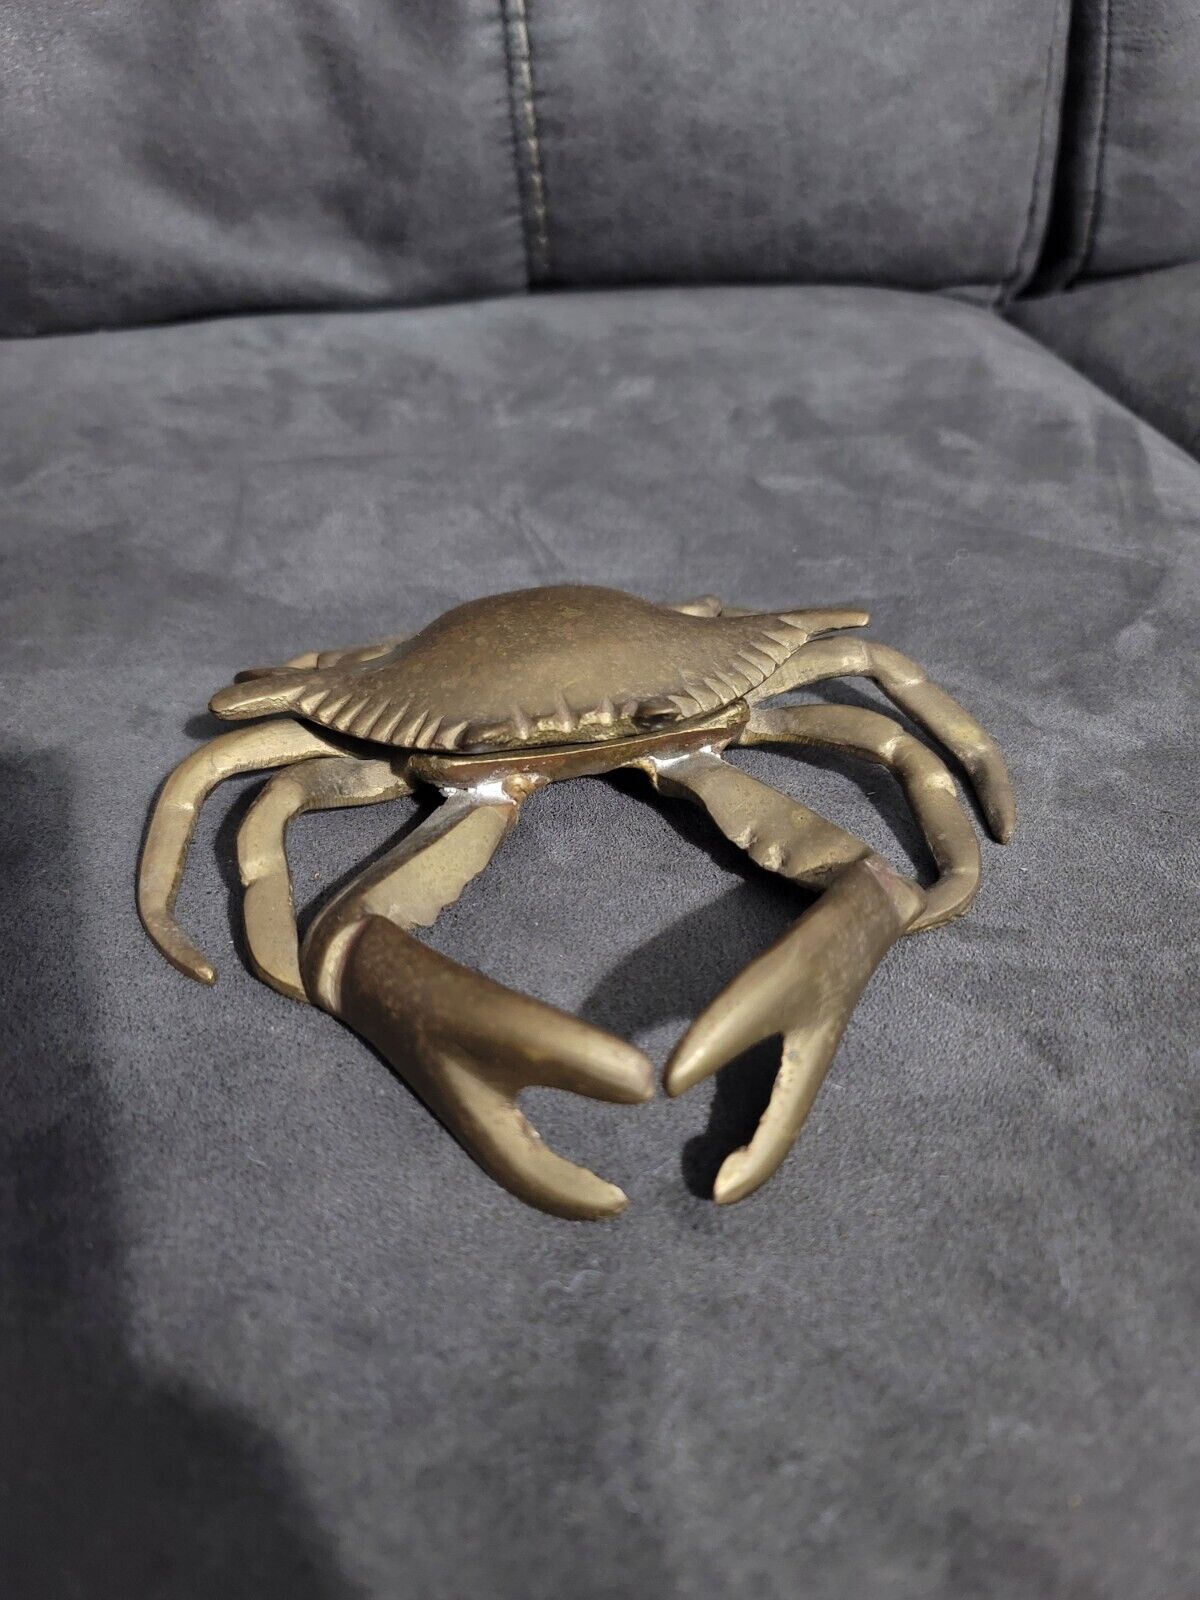 Vintage Brass Crab W/Ashtray Insert Made In India Used As-Is See Pics U